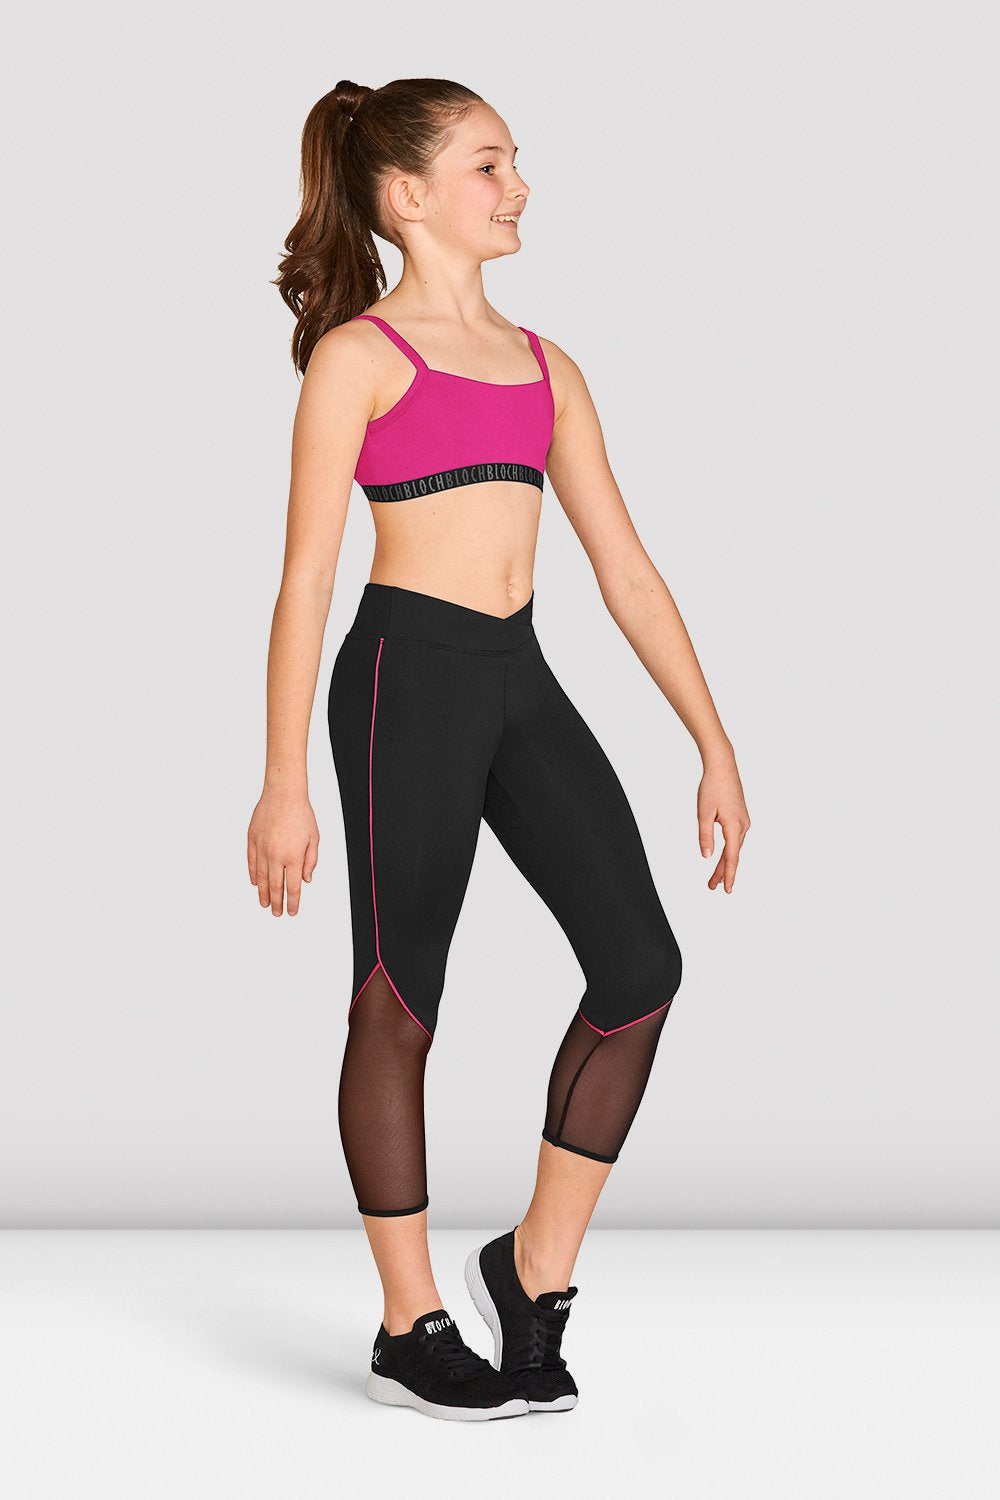 Bloch Dance Leggings and matching crop top – Bodies in Motion